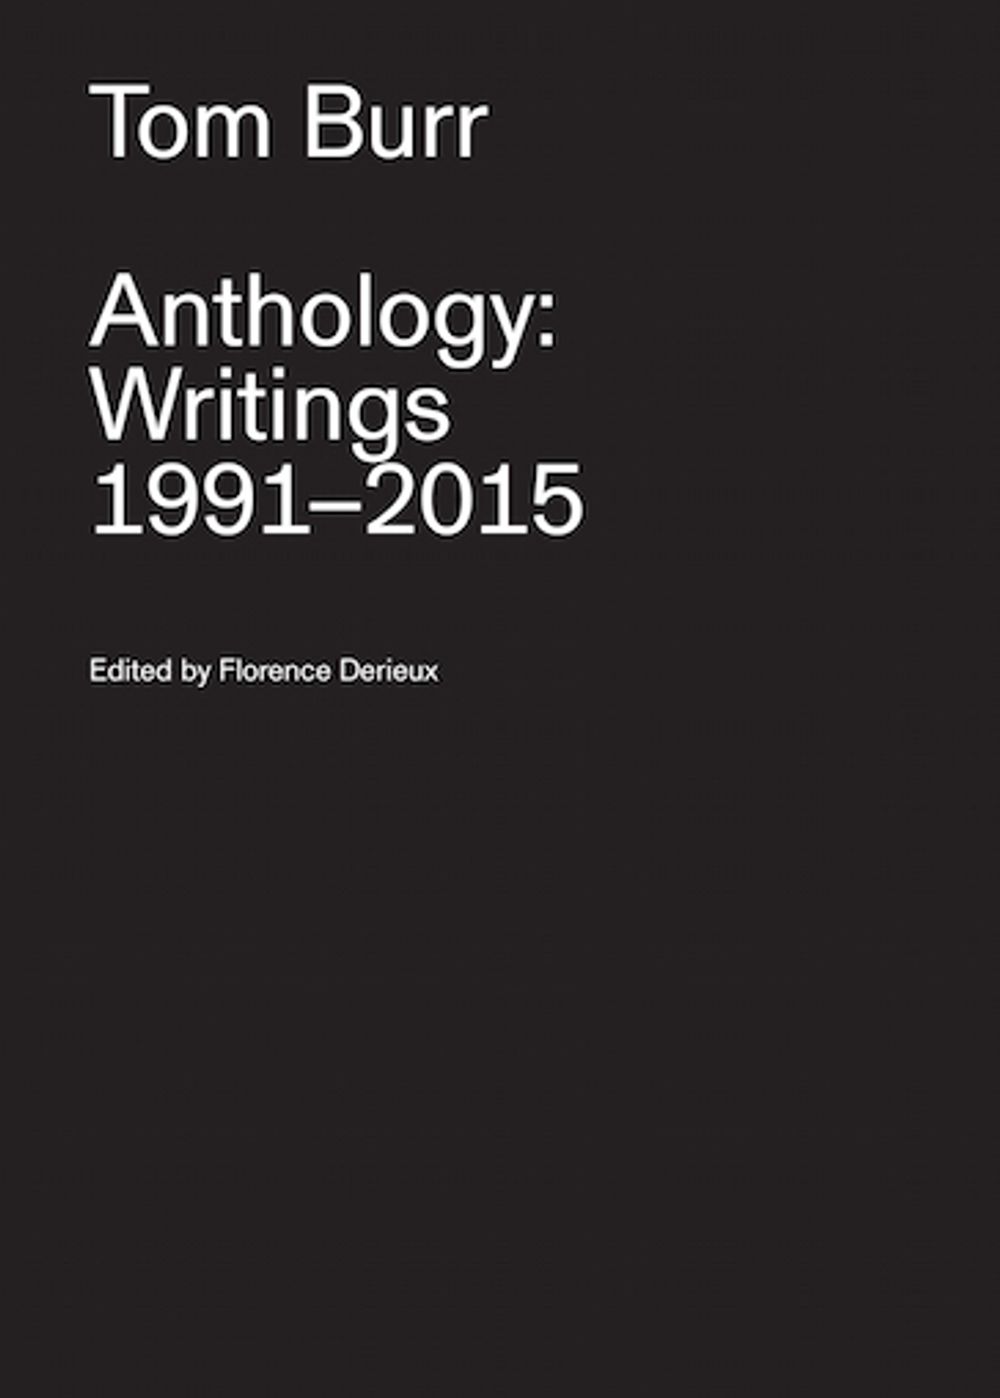 Book cover on plain gray background with title of Tom Burr Anthology: Writings 1991 – 2015